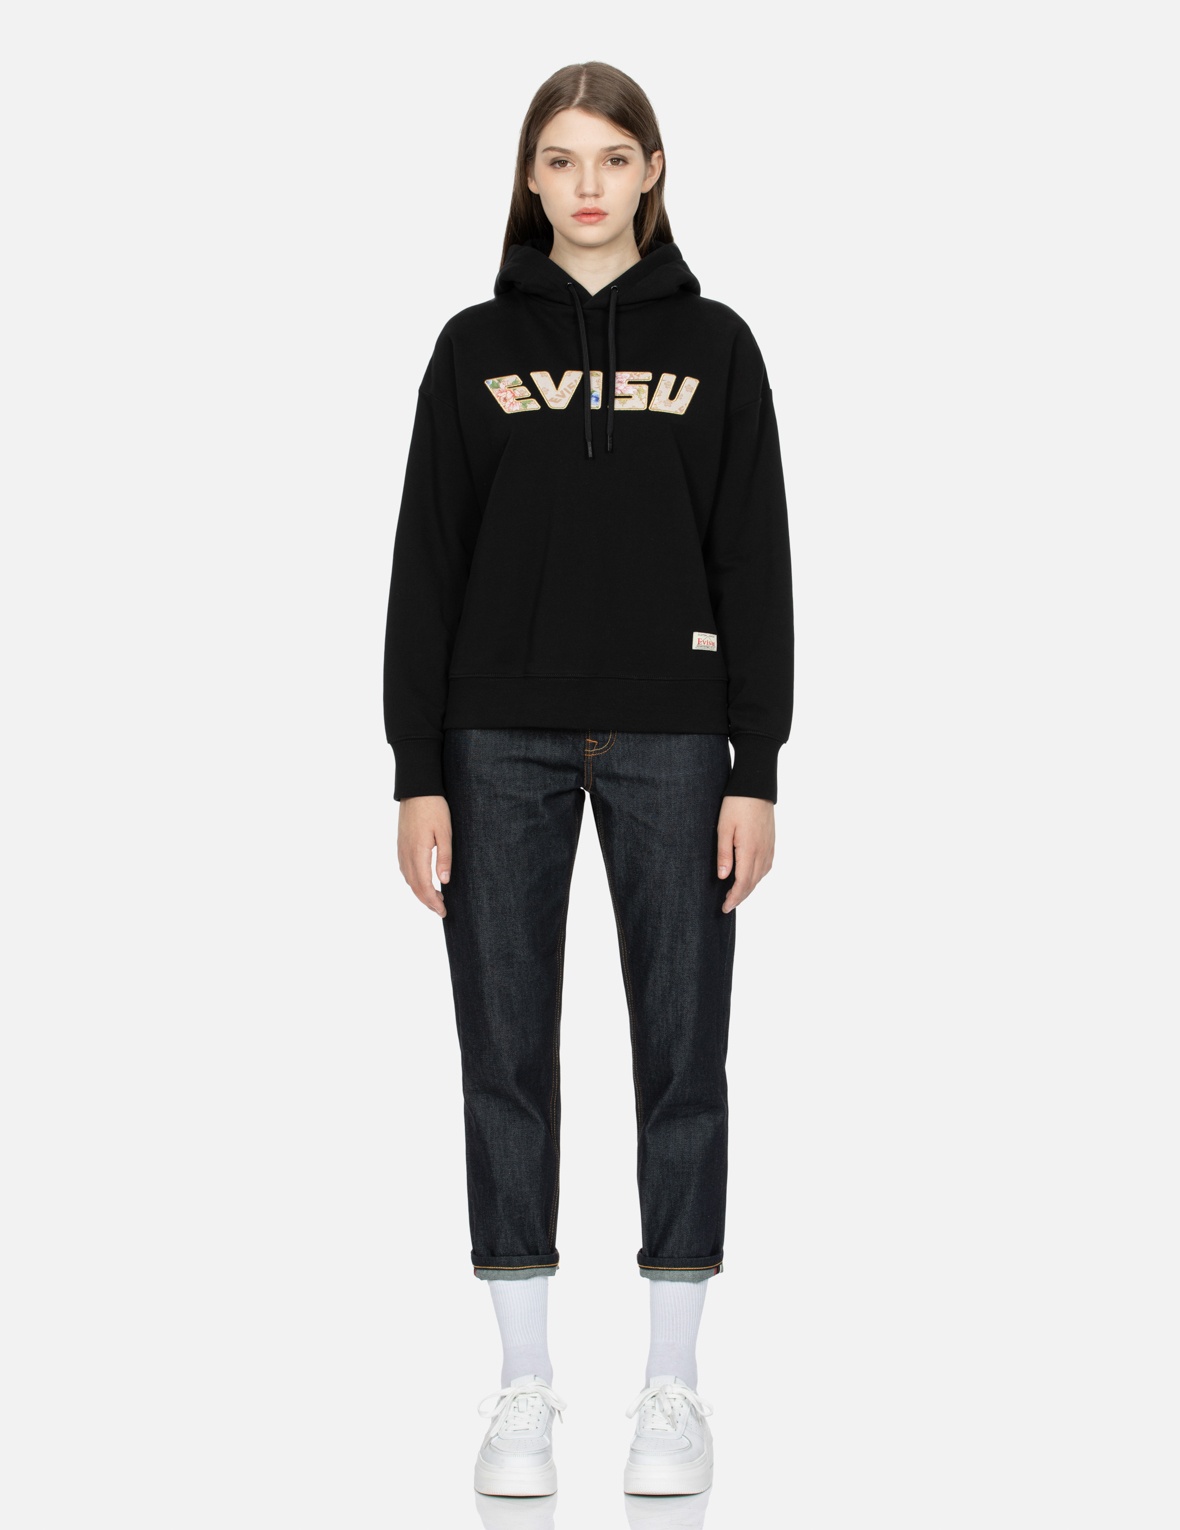 KAMON AND FLORAL-PATTERN LOGO APPLIQUÉ CROPPED HOODIE - 5